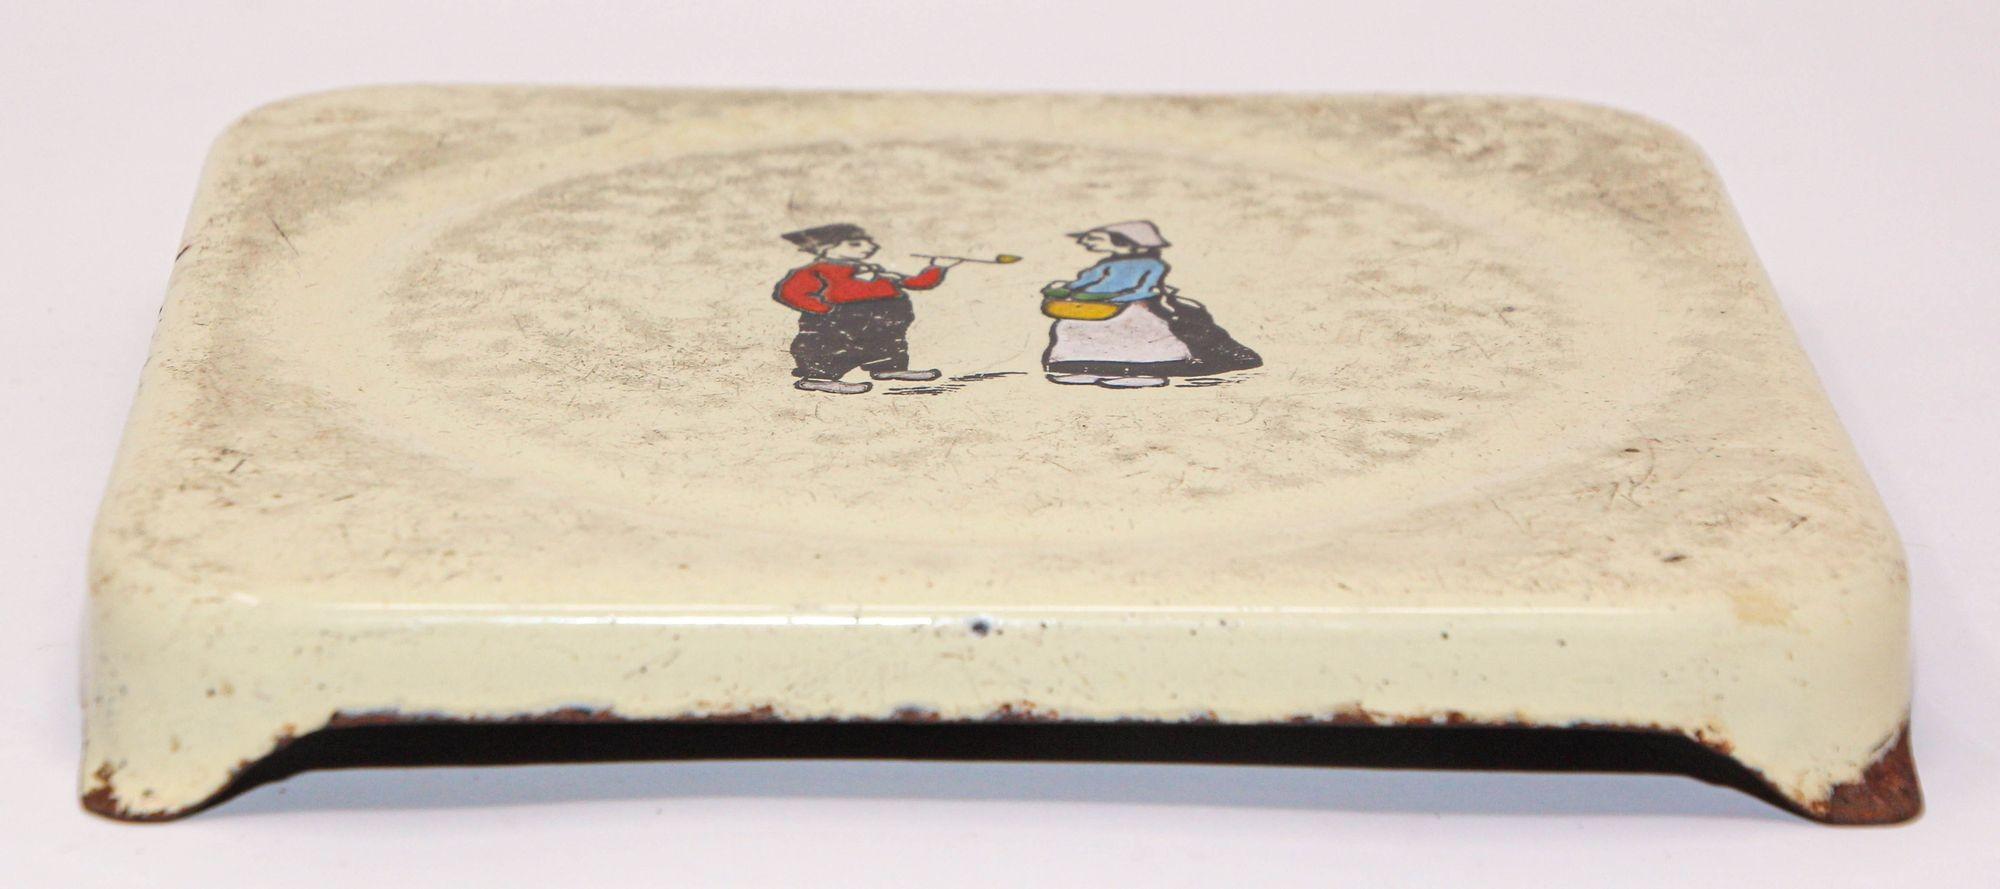 Enameled Antique Hand Painted Dutch Theme Enamelware Metal Trivet Collectible 1920s For Sale